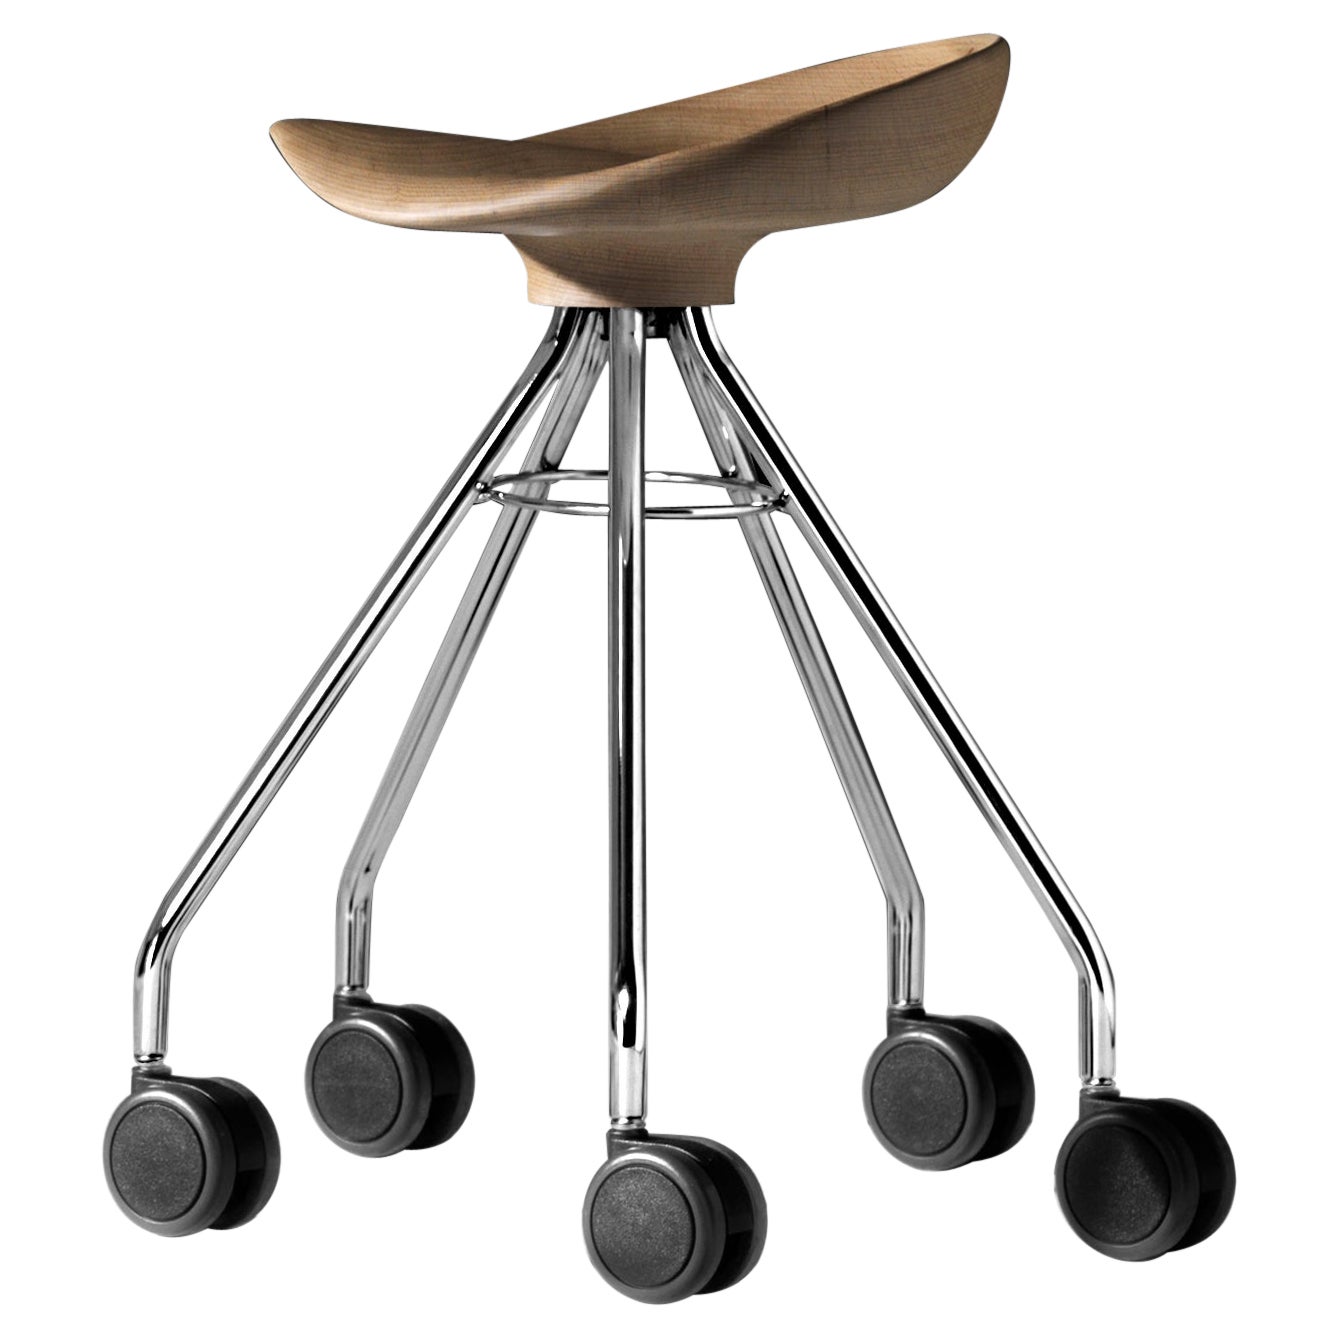 Jamaica low stool with wheels, Wood Seat